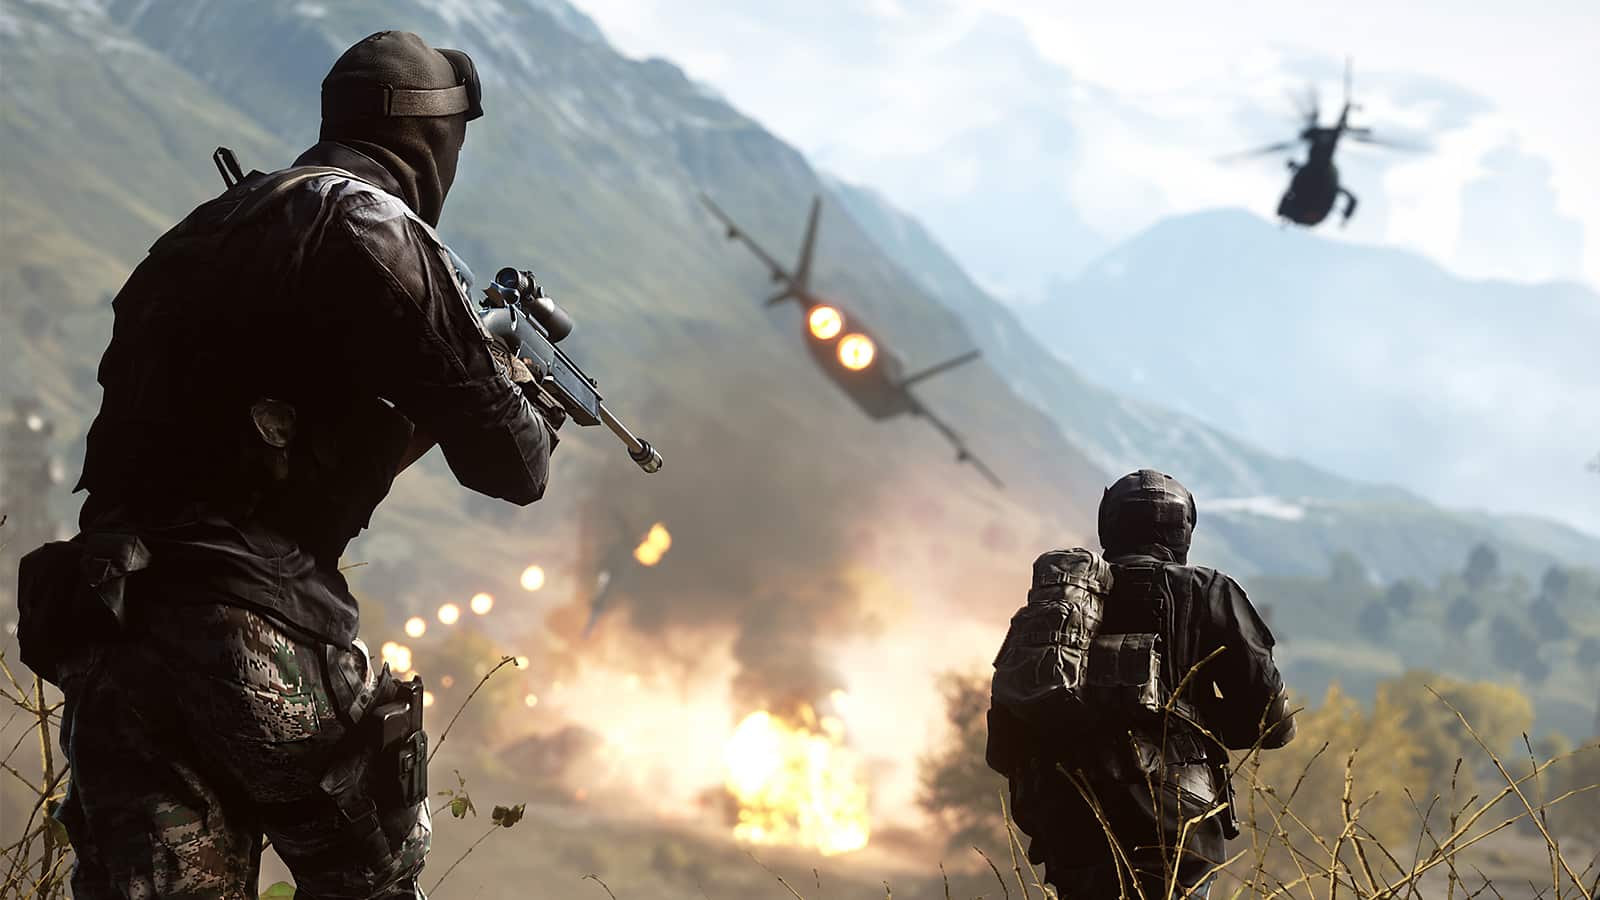 An image of a helicopter and players in Battlefield 4